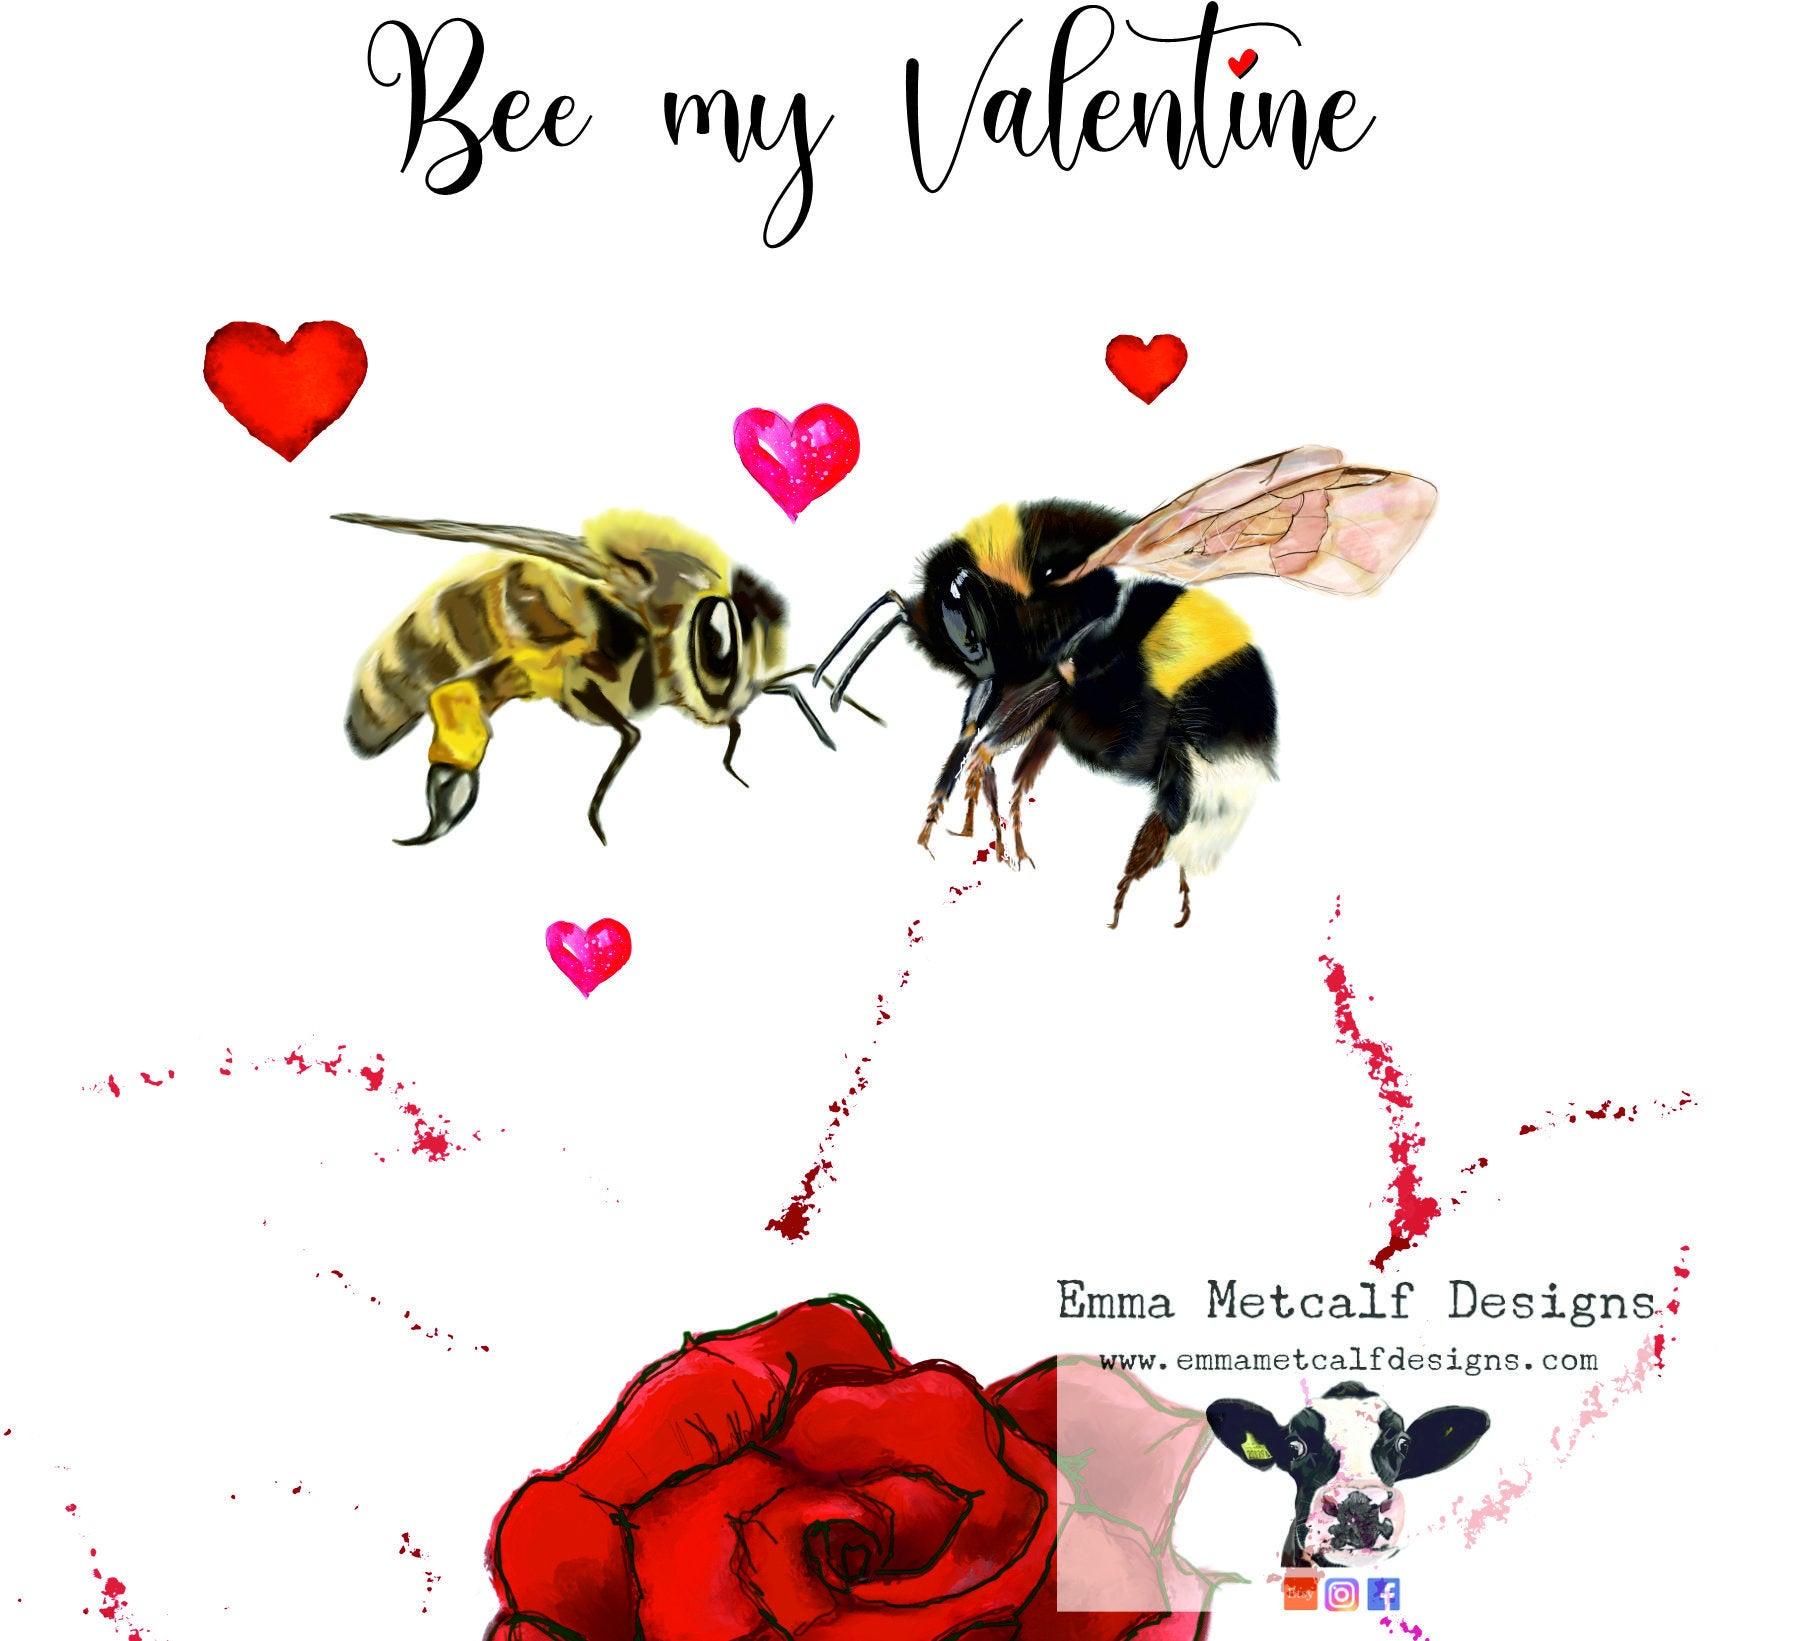 Eco Friendly Bee my Valentine plantable seed card - Honey bee Valentine's card- bumble bee- for him- her-them-love-Valentine's day